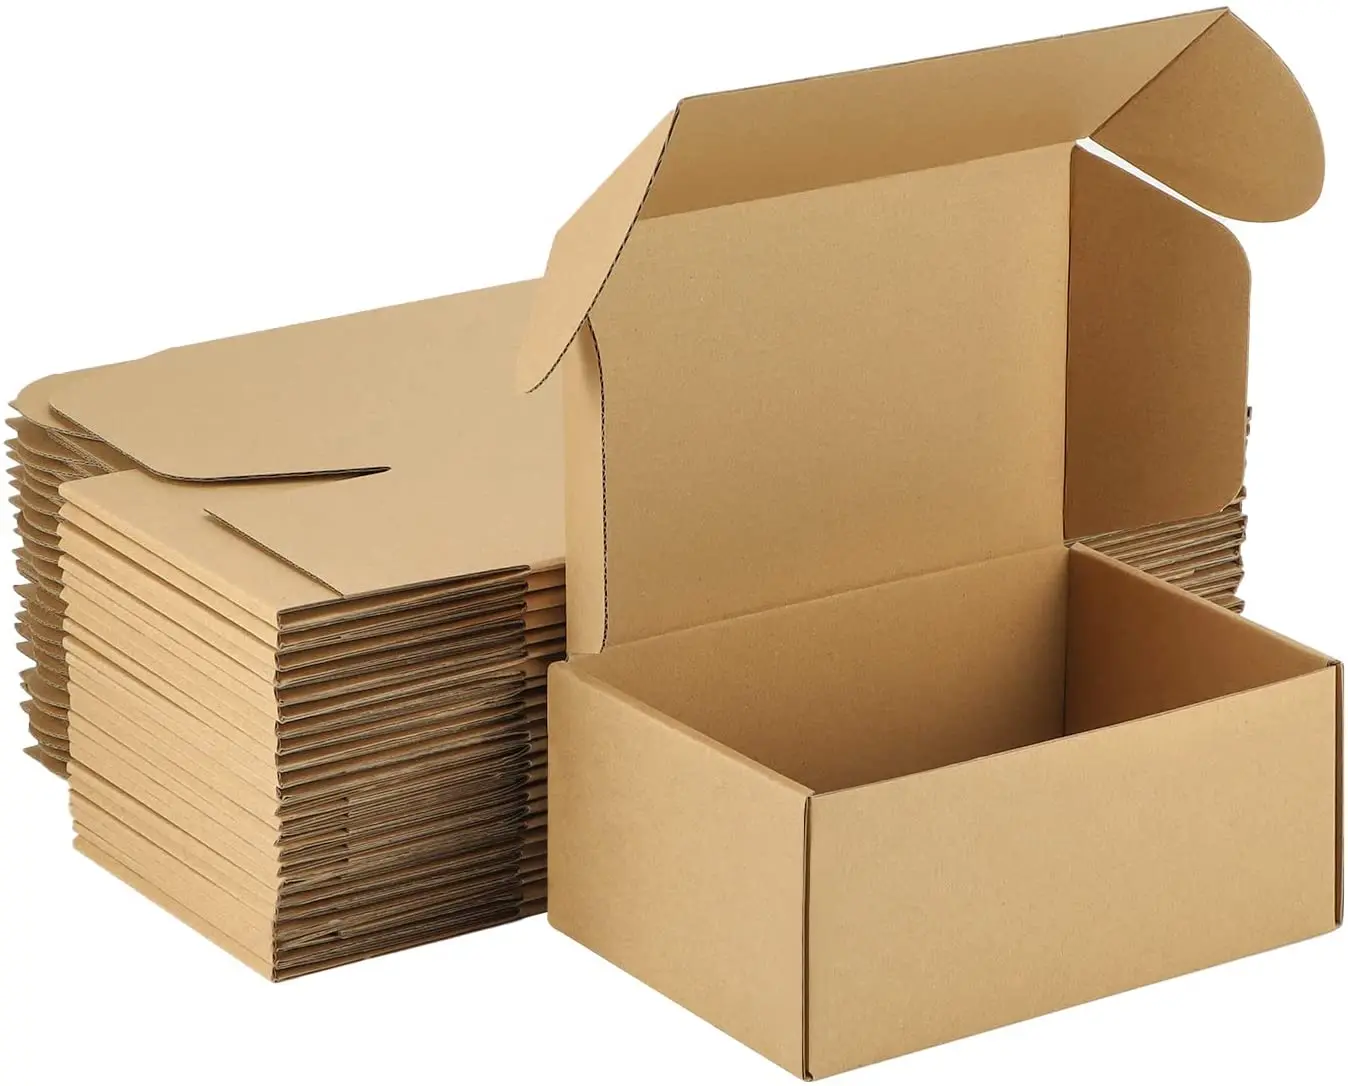 25 Pack 9x6x4 Shipping Boxes White Cardboard Mailing Boxes Single Wall Corrugated Box 